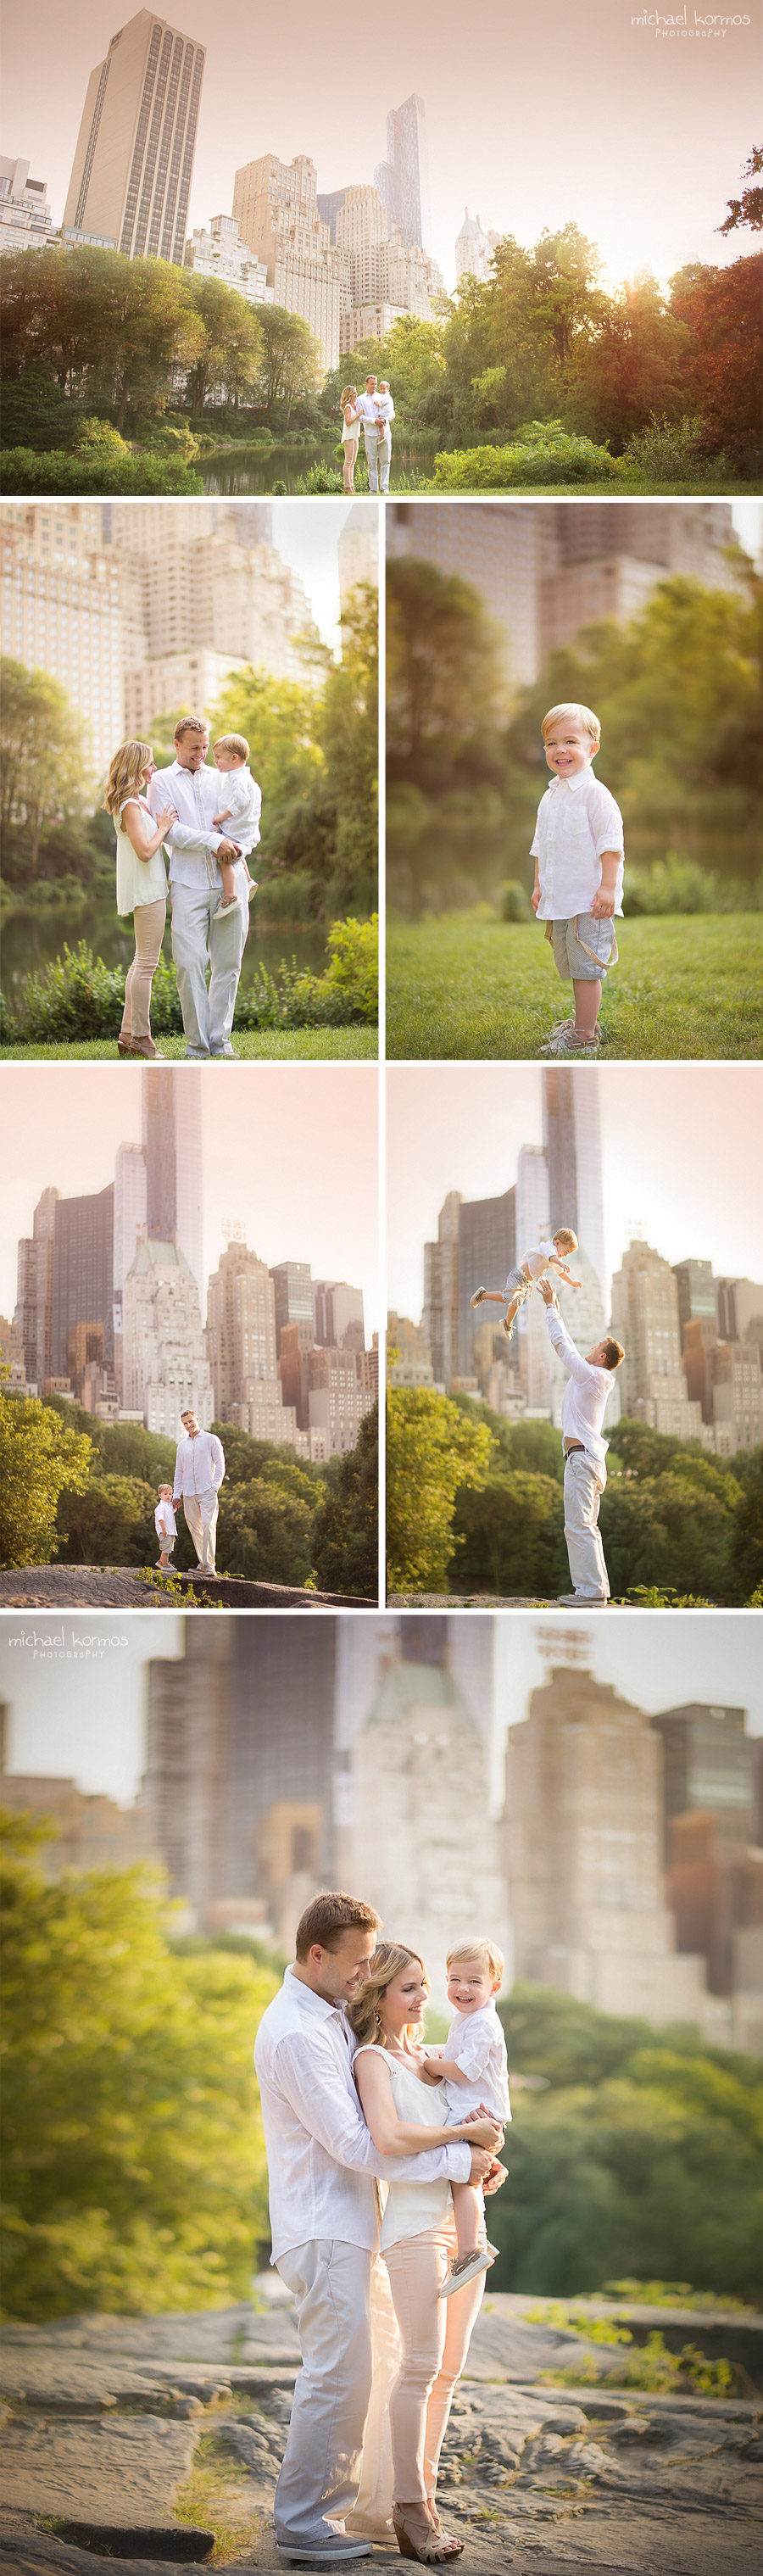 lifestyle baby photography captured in Central Park